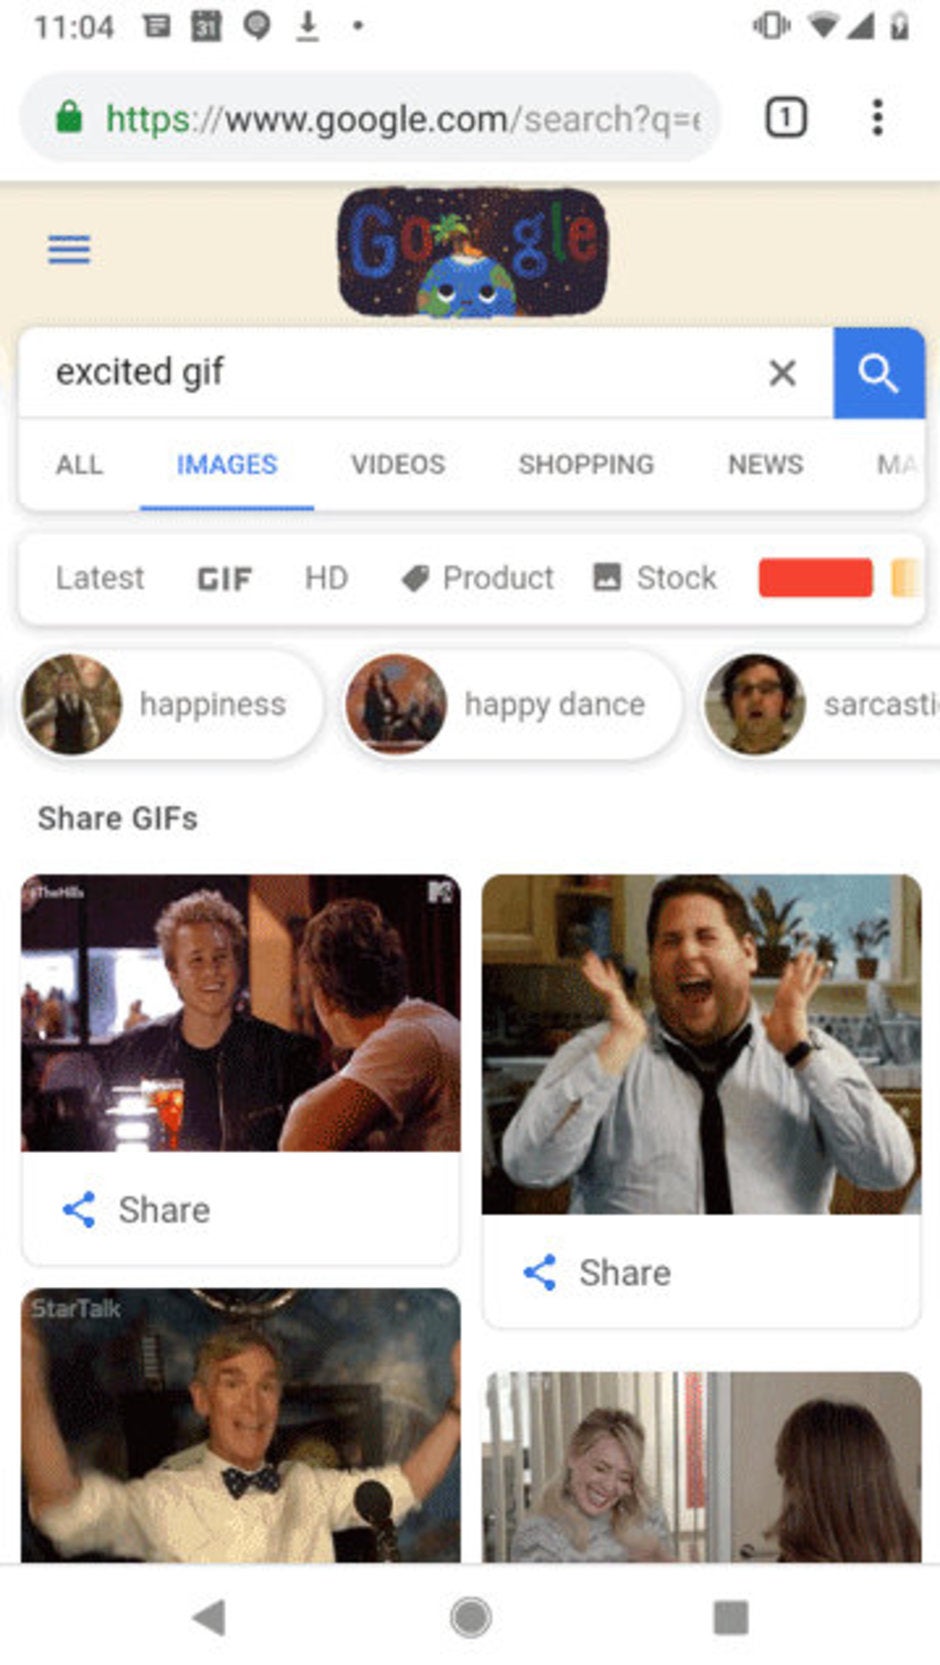 Google lets users share GIFs directly into Gmail, WhatsApp, other apps